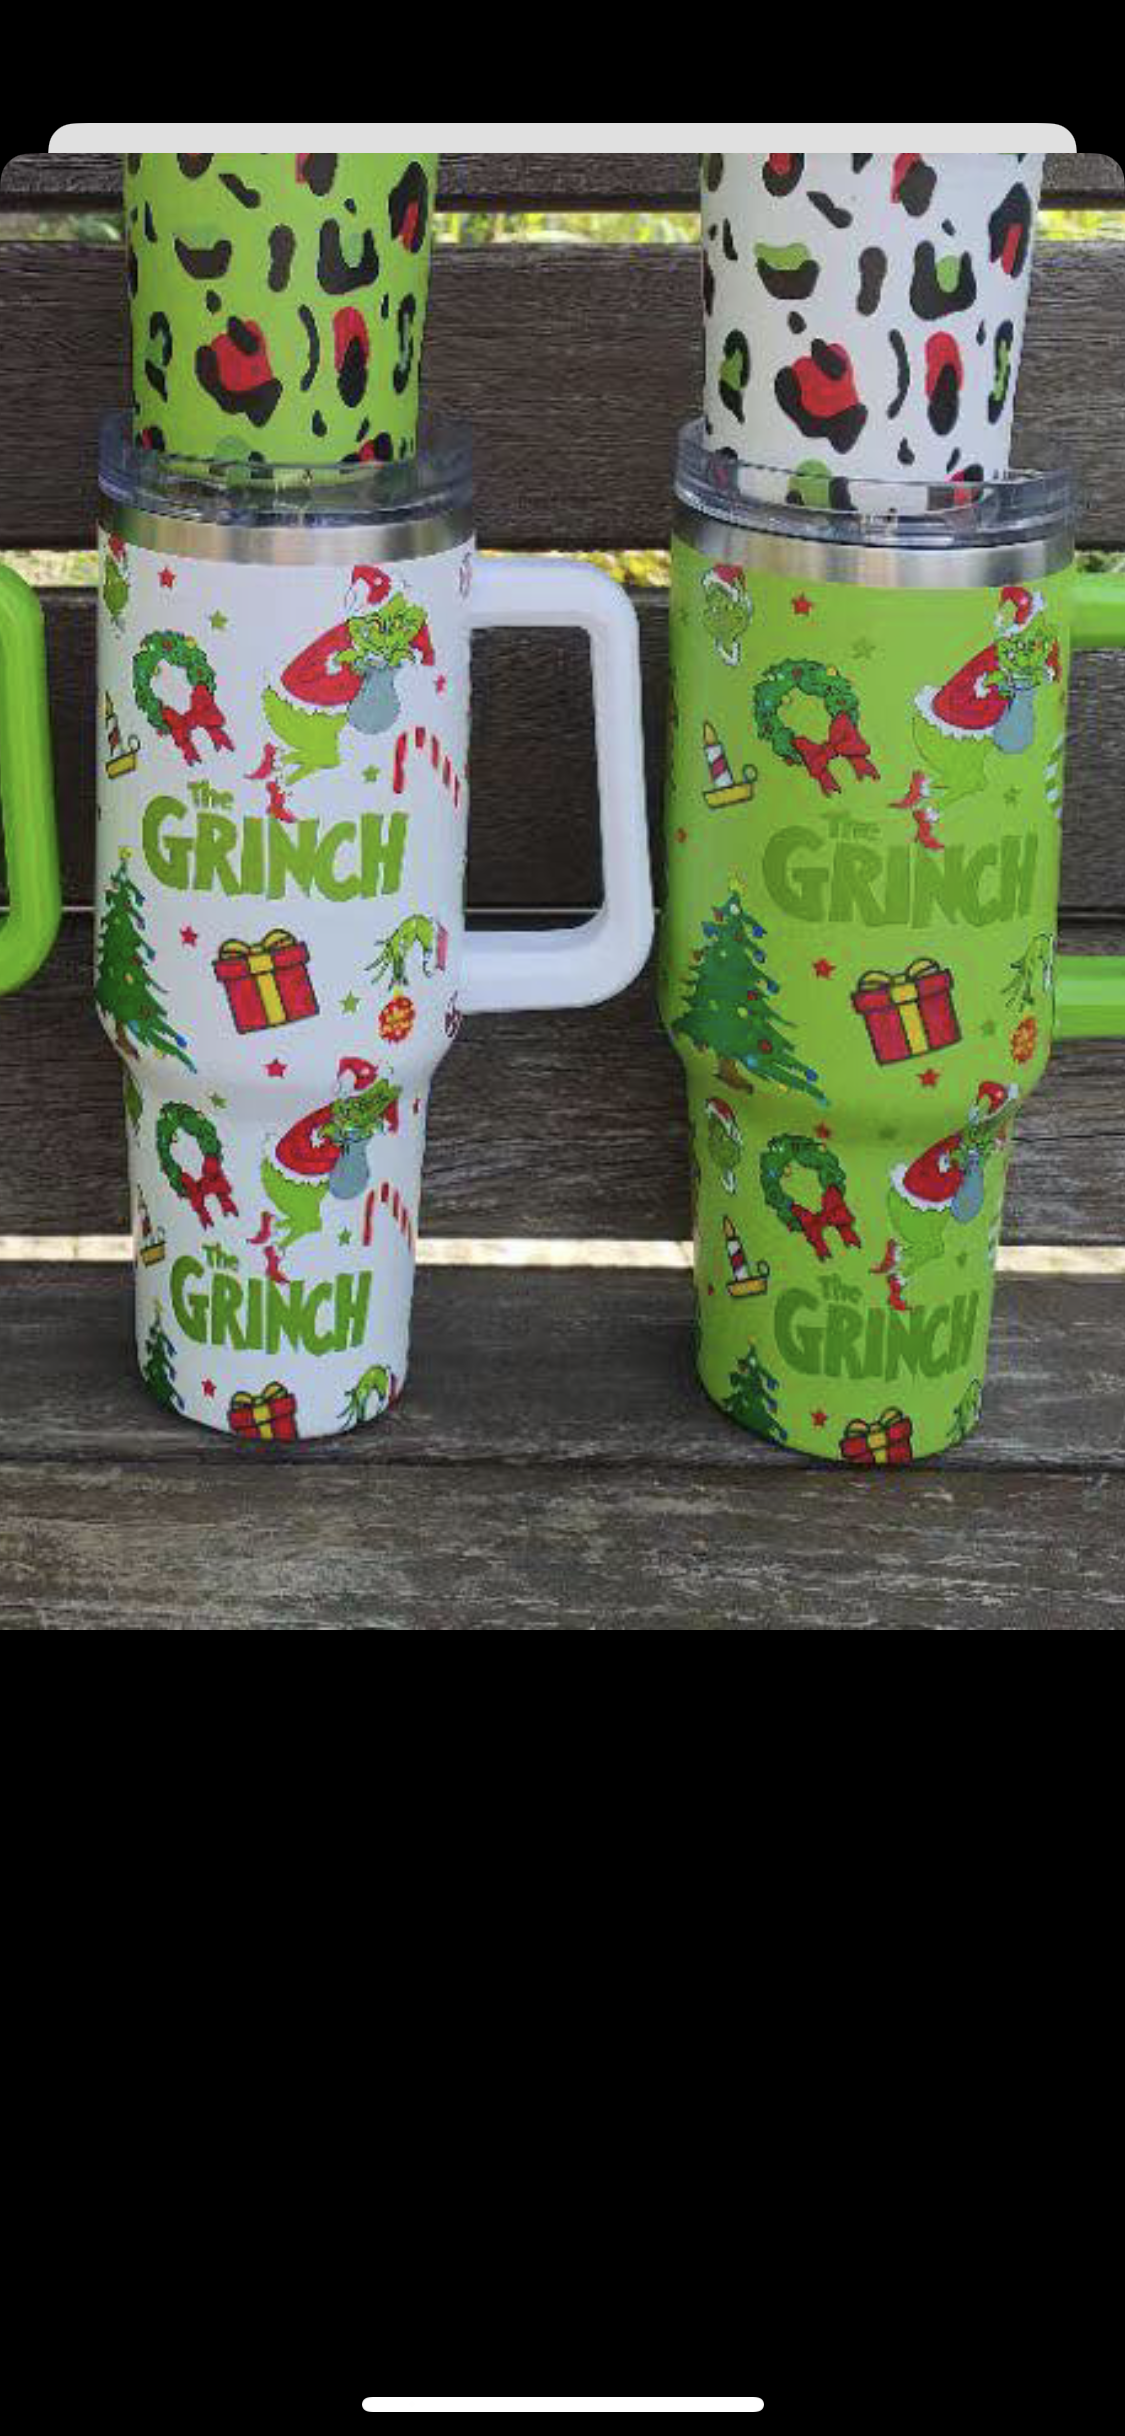 THE GRINCH STAINLESS STEEL TUMBLER WITH STRAW 40 OZ. NEW.